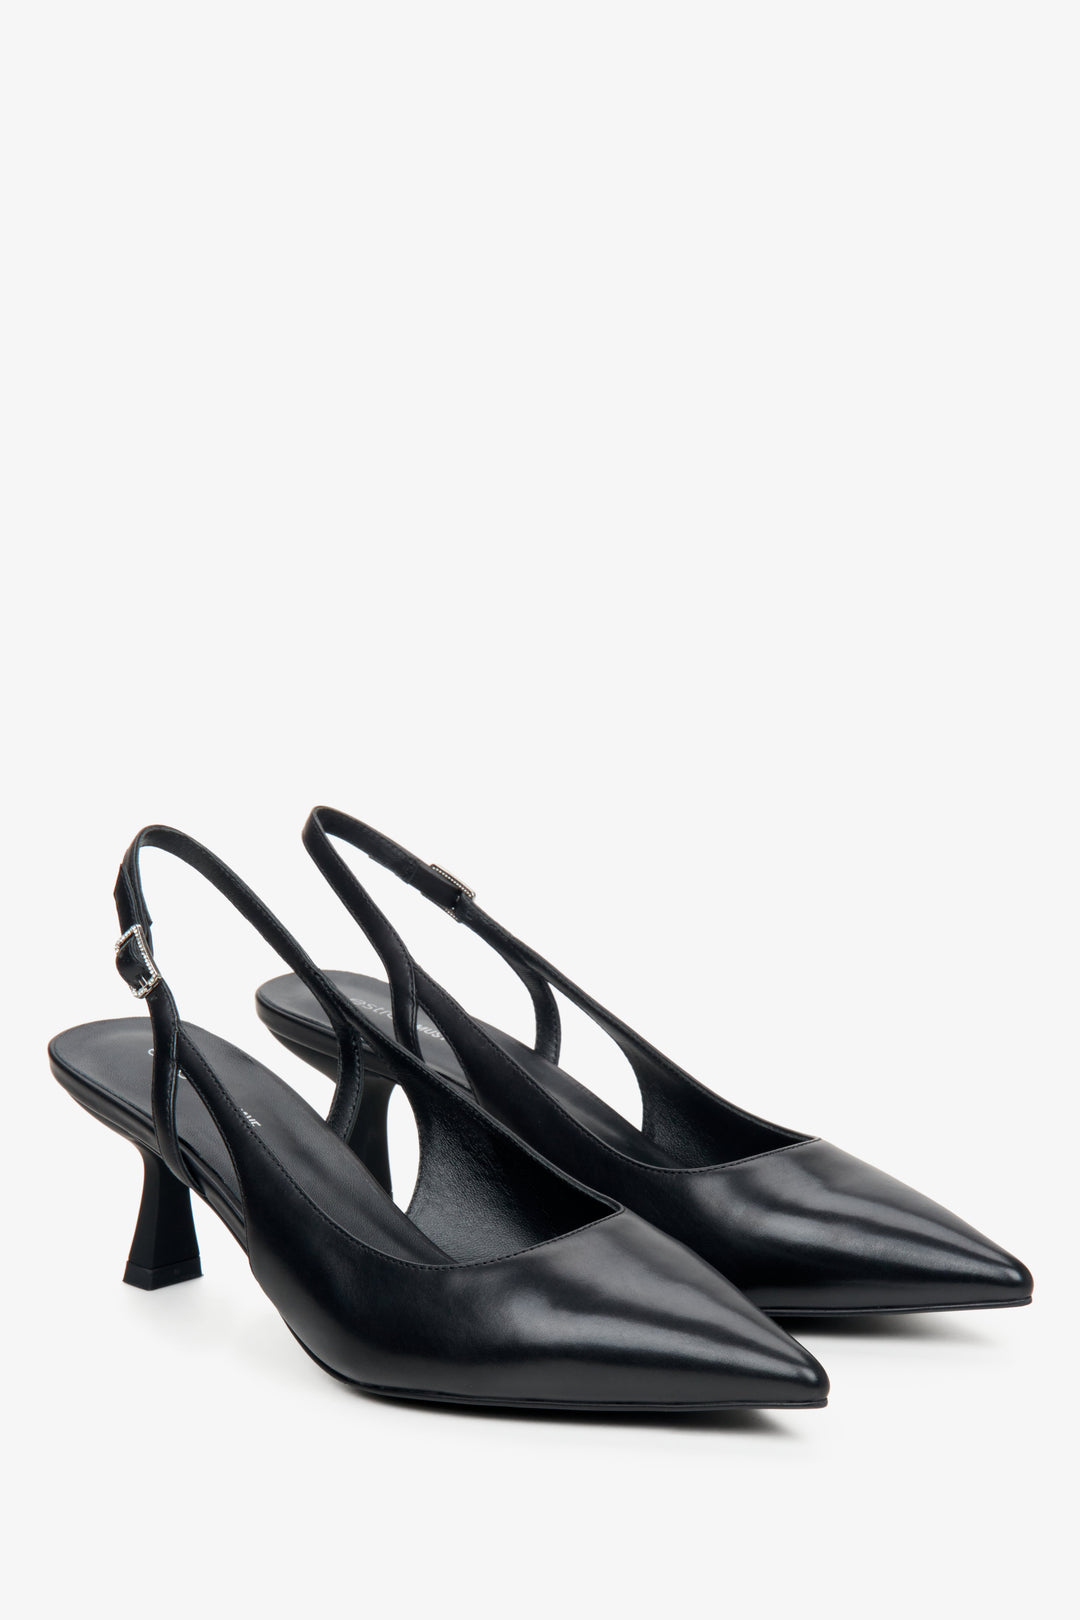 Women's black slingback pumps made of genuine leather by Estro x MustHave.